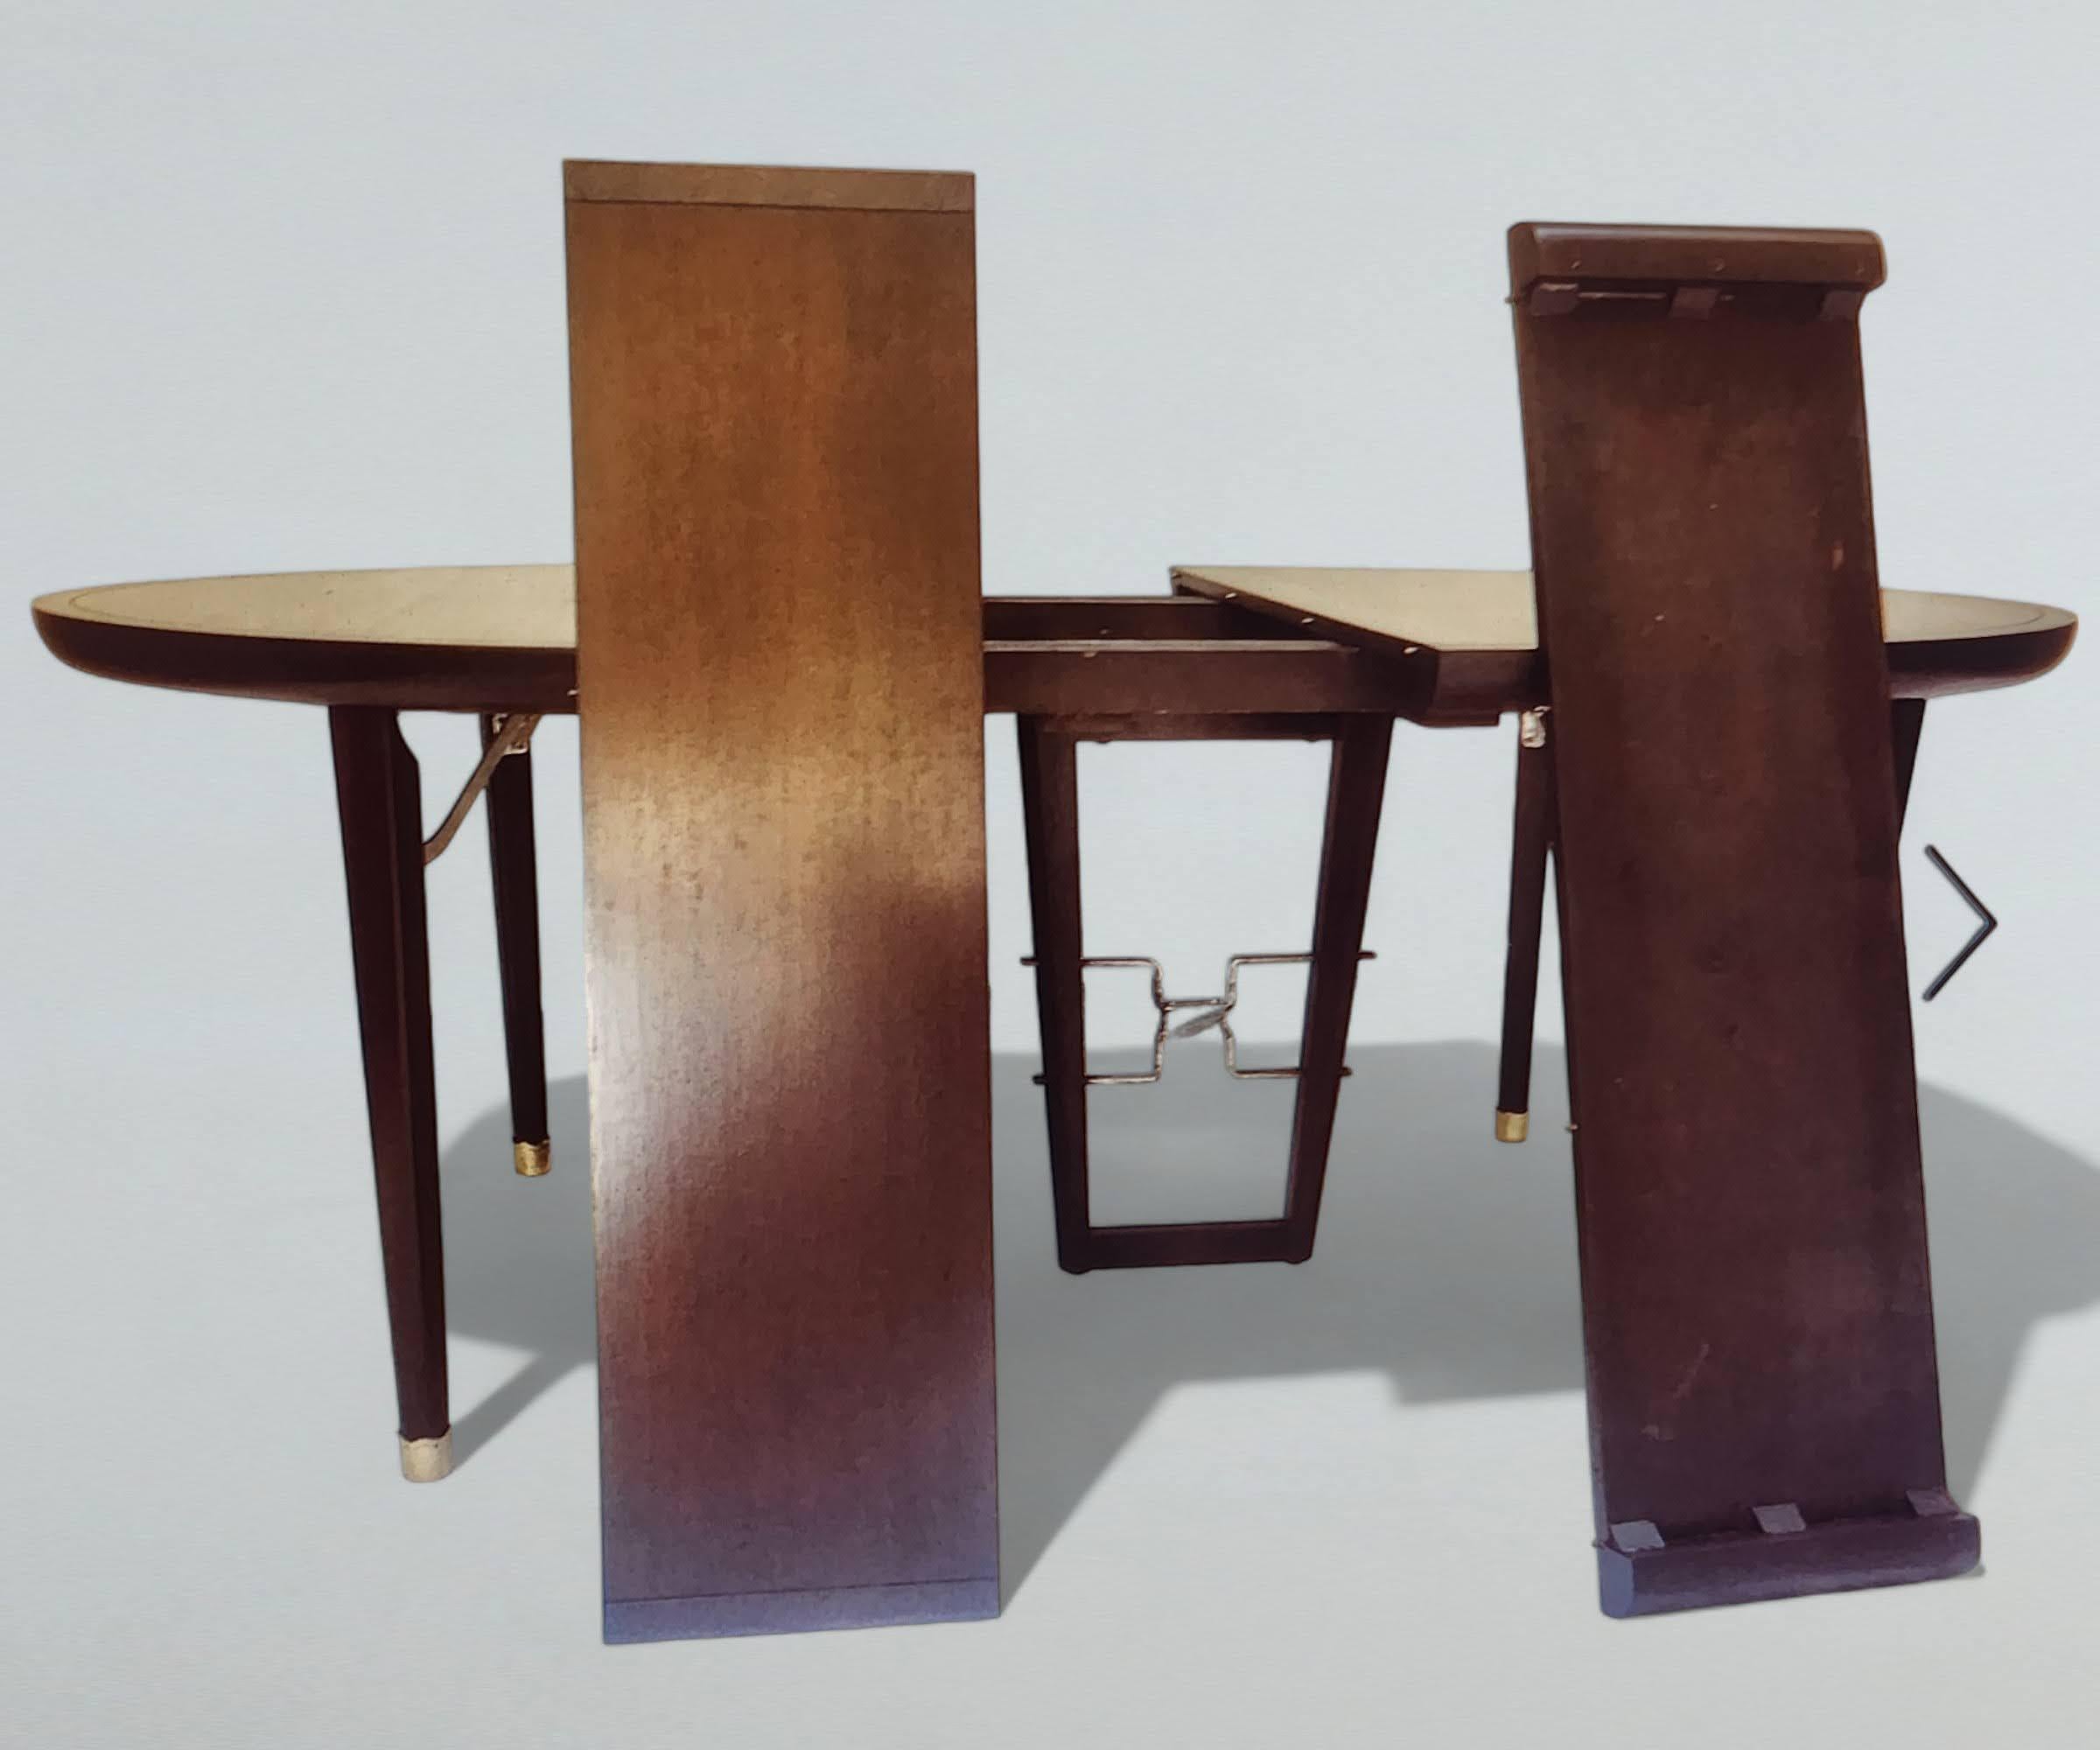 Gold Leaf Edmond Spence Mahogany Dining Table Designed for Industria Mueblera, circa 1958 For Sale